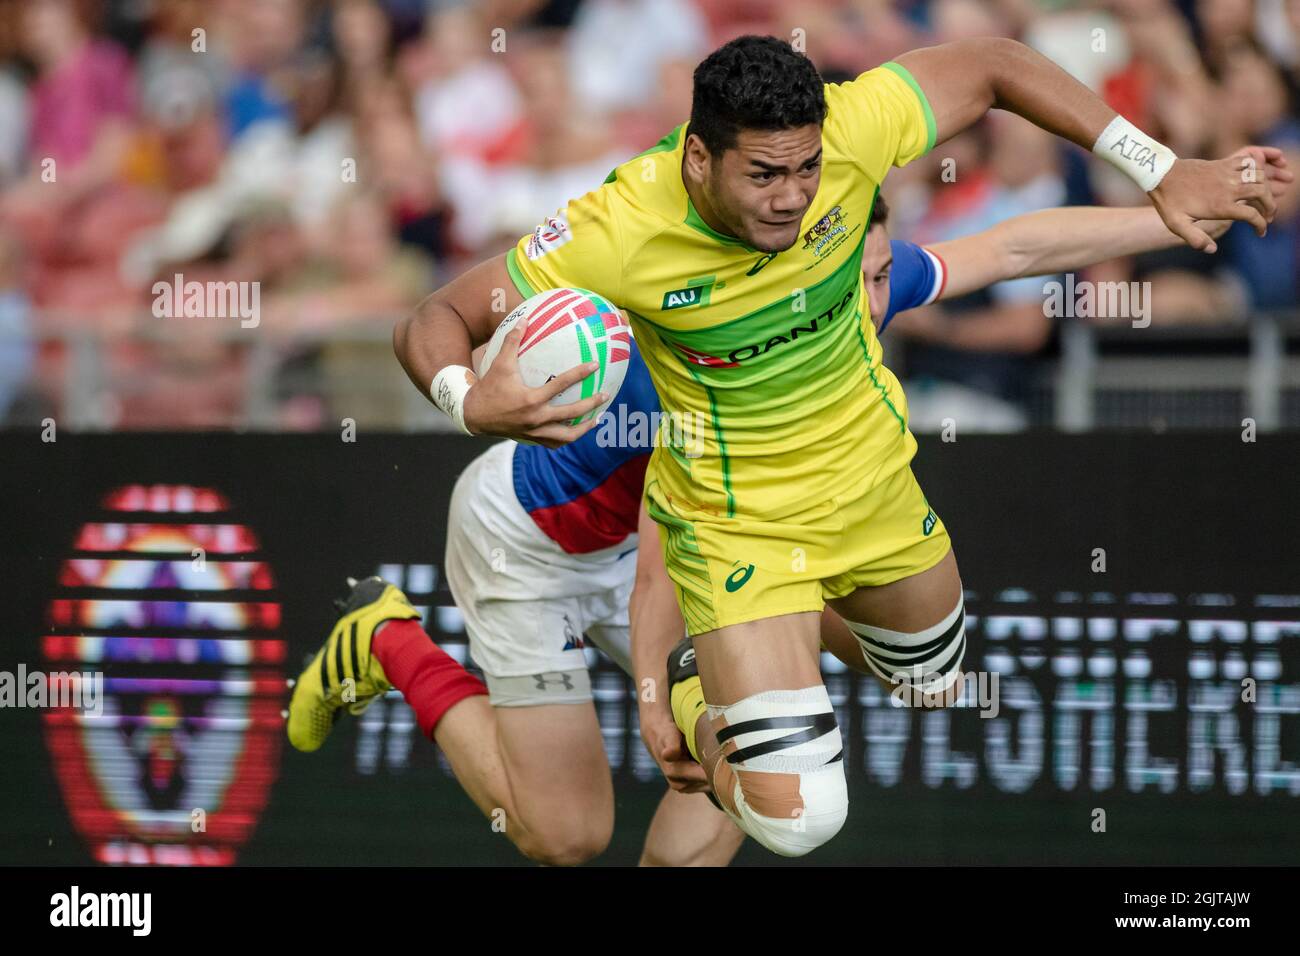 SINGAPORE-APRIL 13:Australia 7s Team (yellow) plays against France 7s team (blue/red) during Day 1 of HSBC World Rugby Singapore Sevens on April 13, 2019 at National Stadium in Singapore Stock Photo